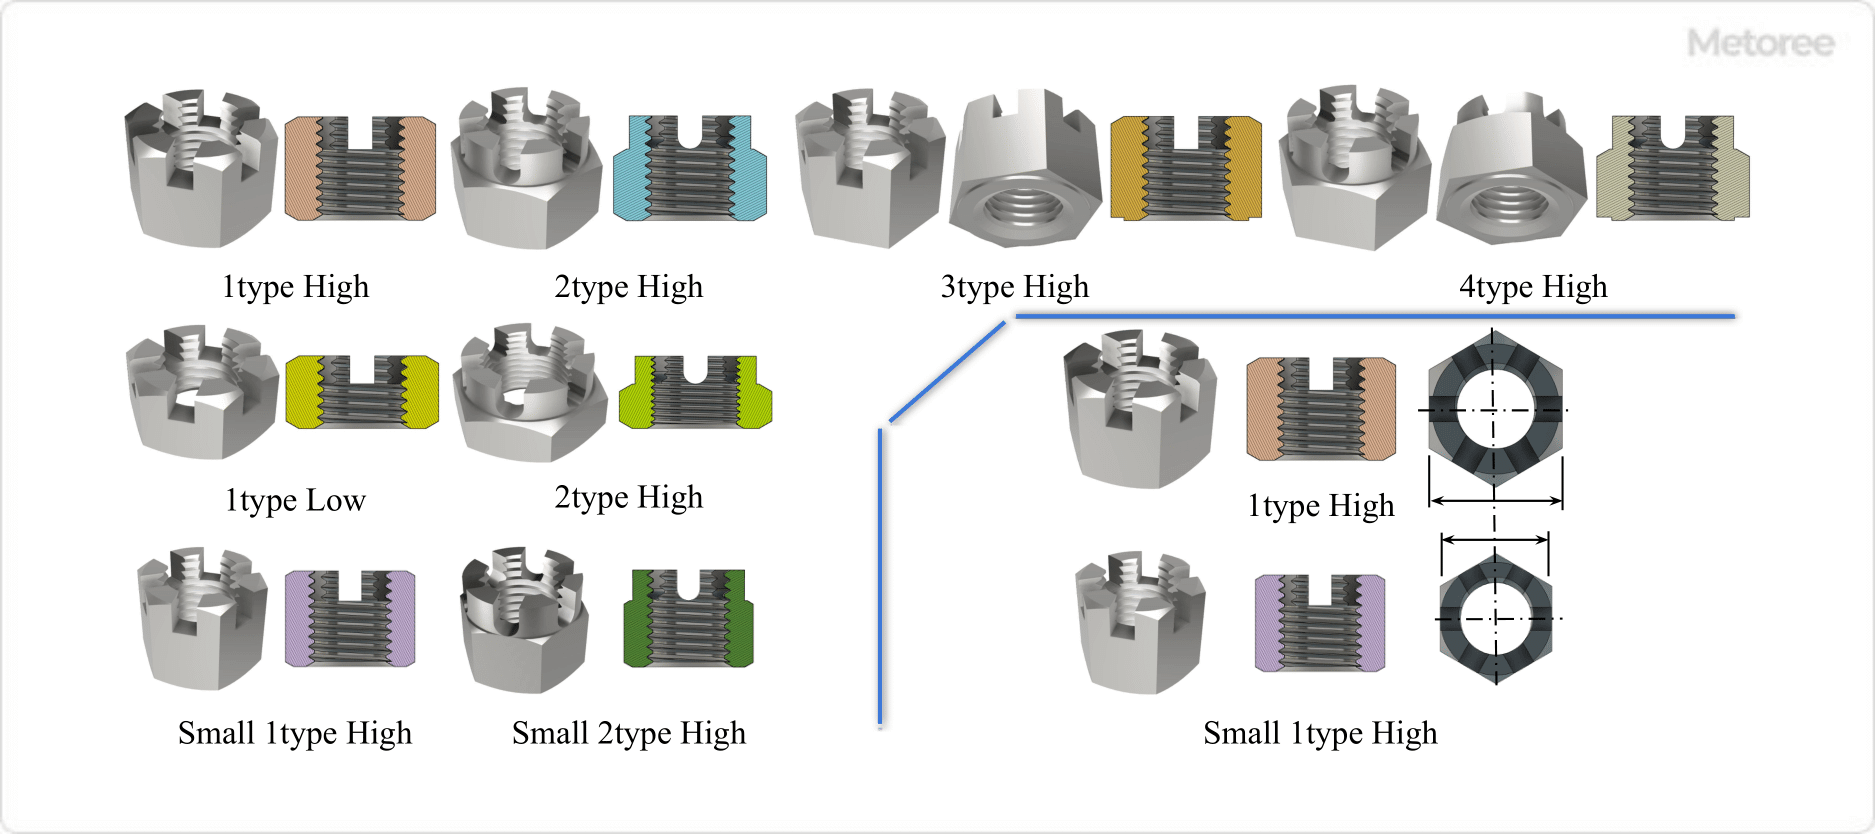 Figure 4. Types of hexagon slotted nuts